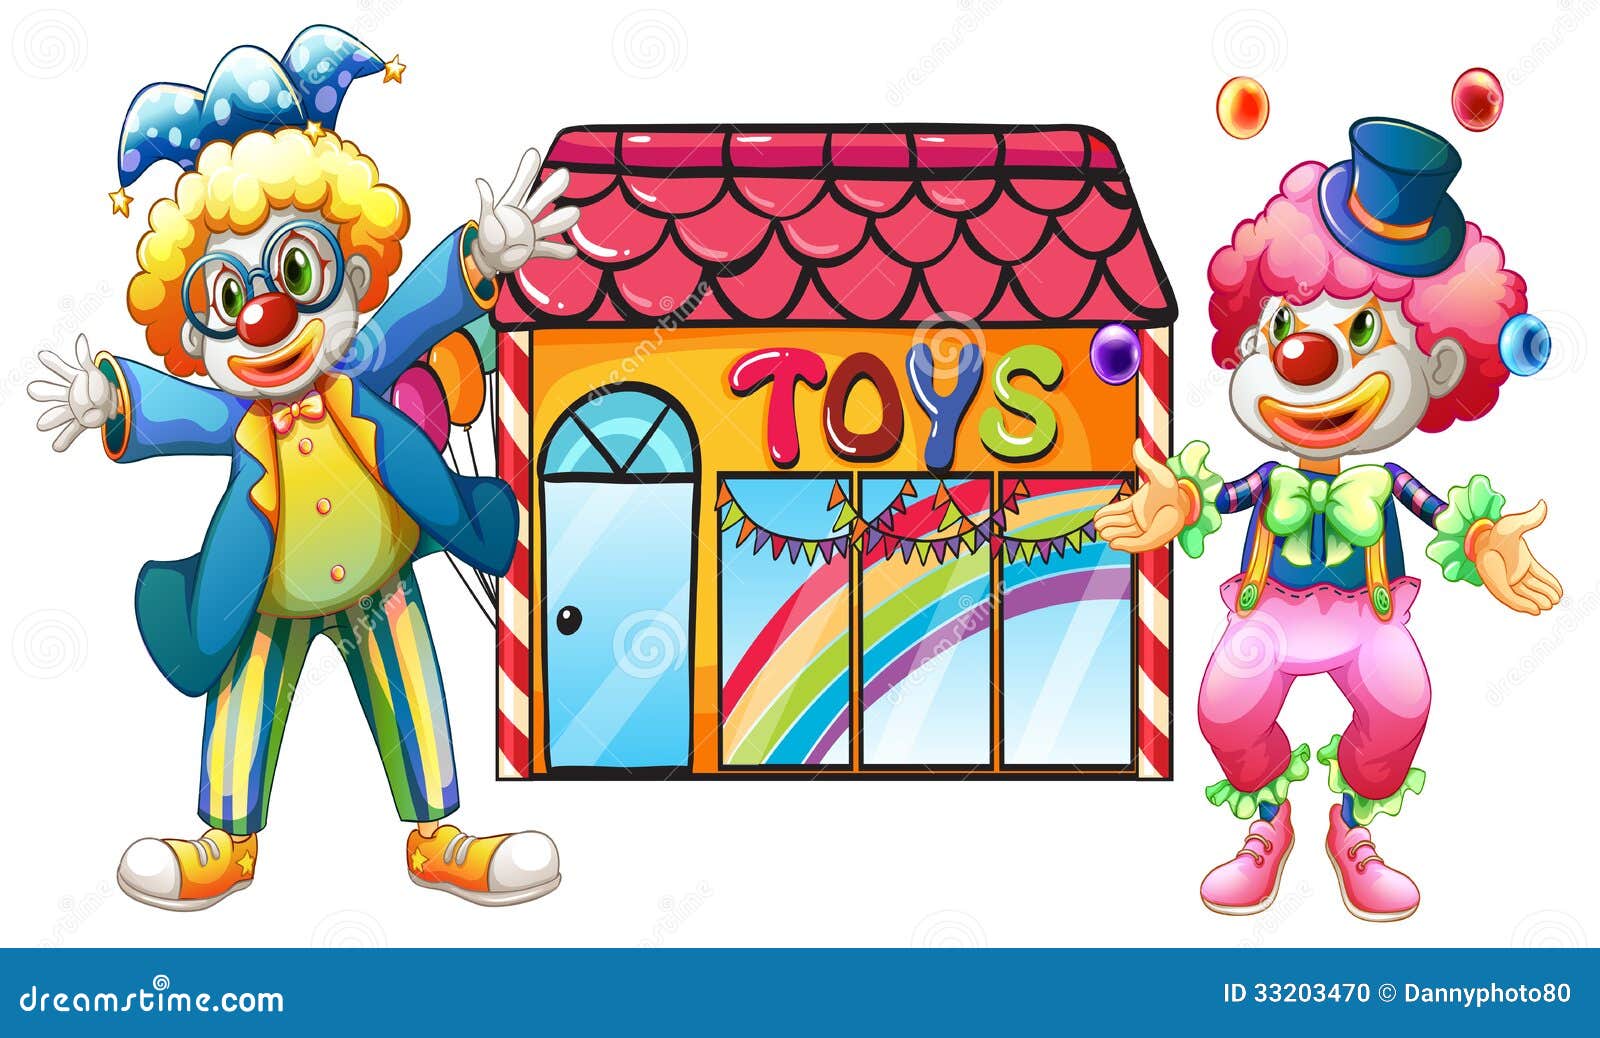 toy store clipart - photo #11